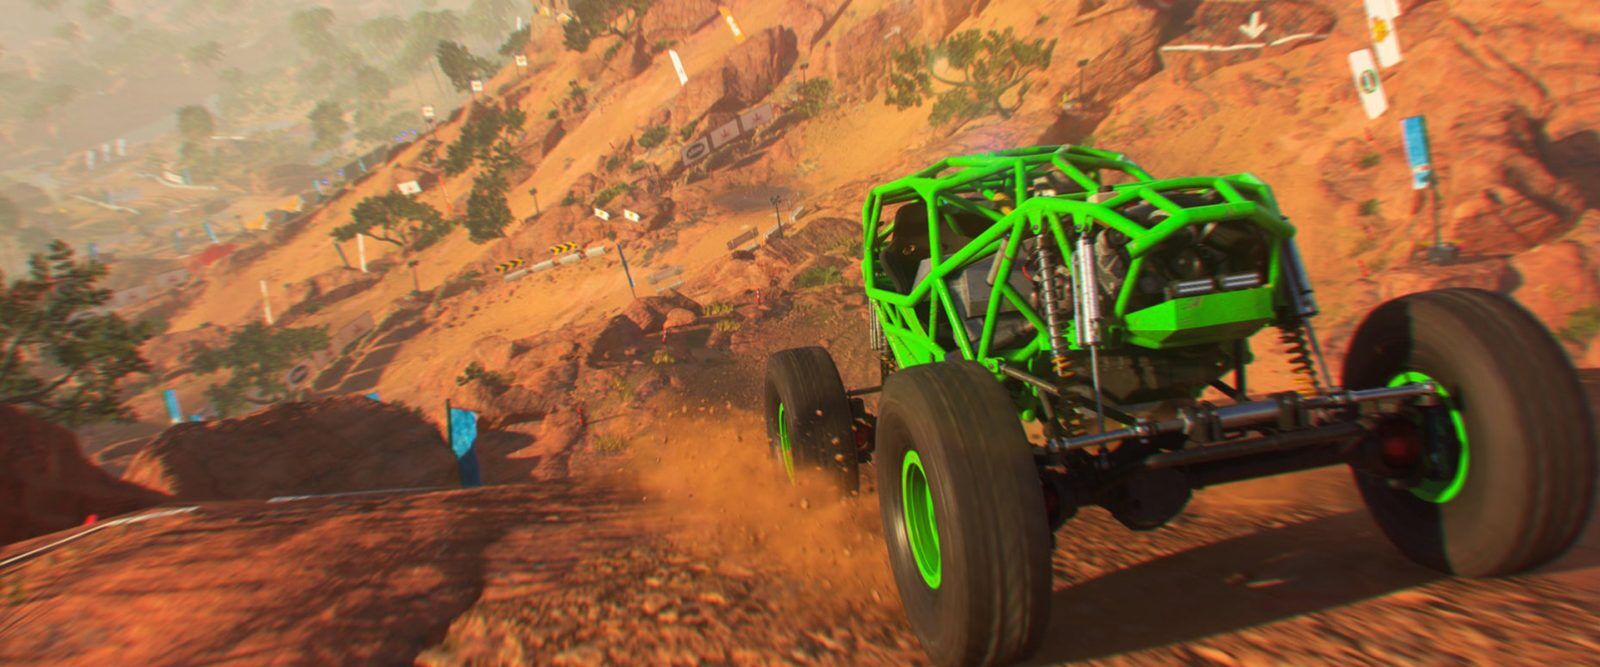 DIRT 5 developer: Taking things to a new level with next-gen